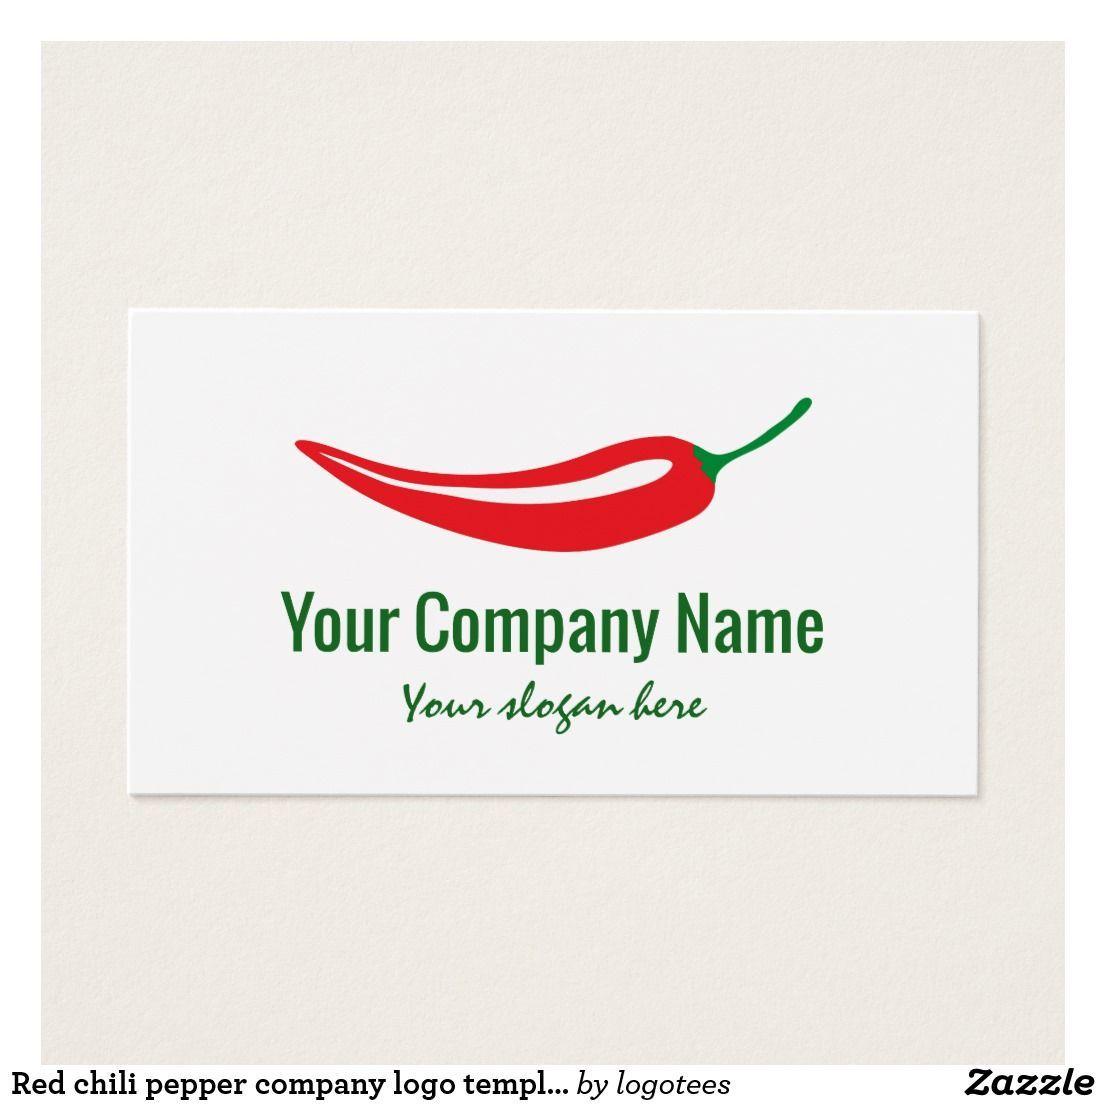 Red Chili Pepper Restaurant Logo - Red chili pepper company logo template business card. Business card